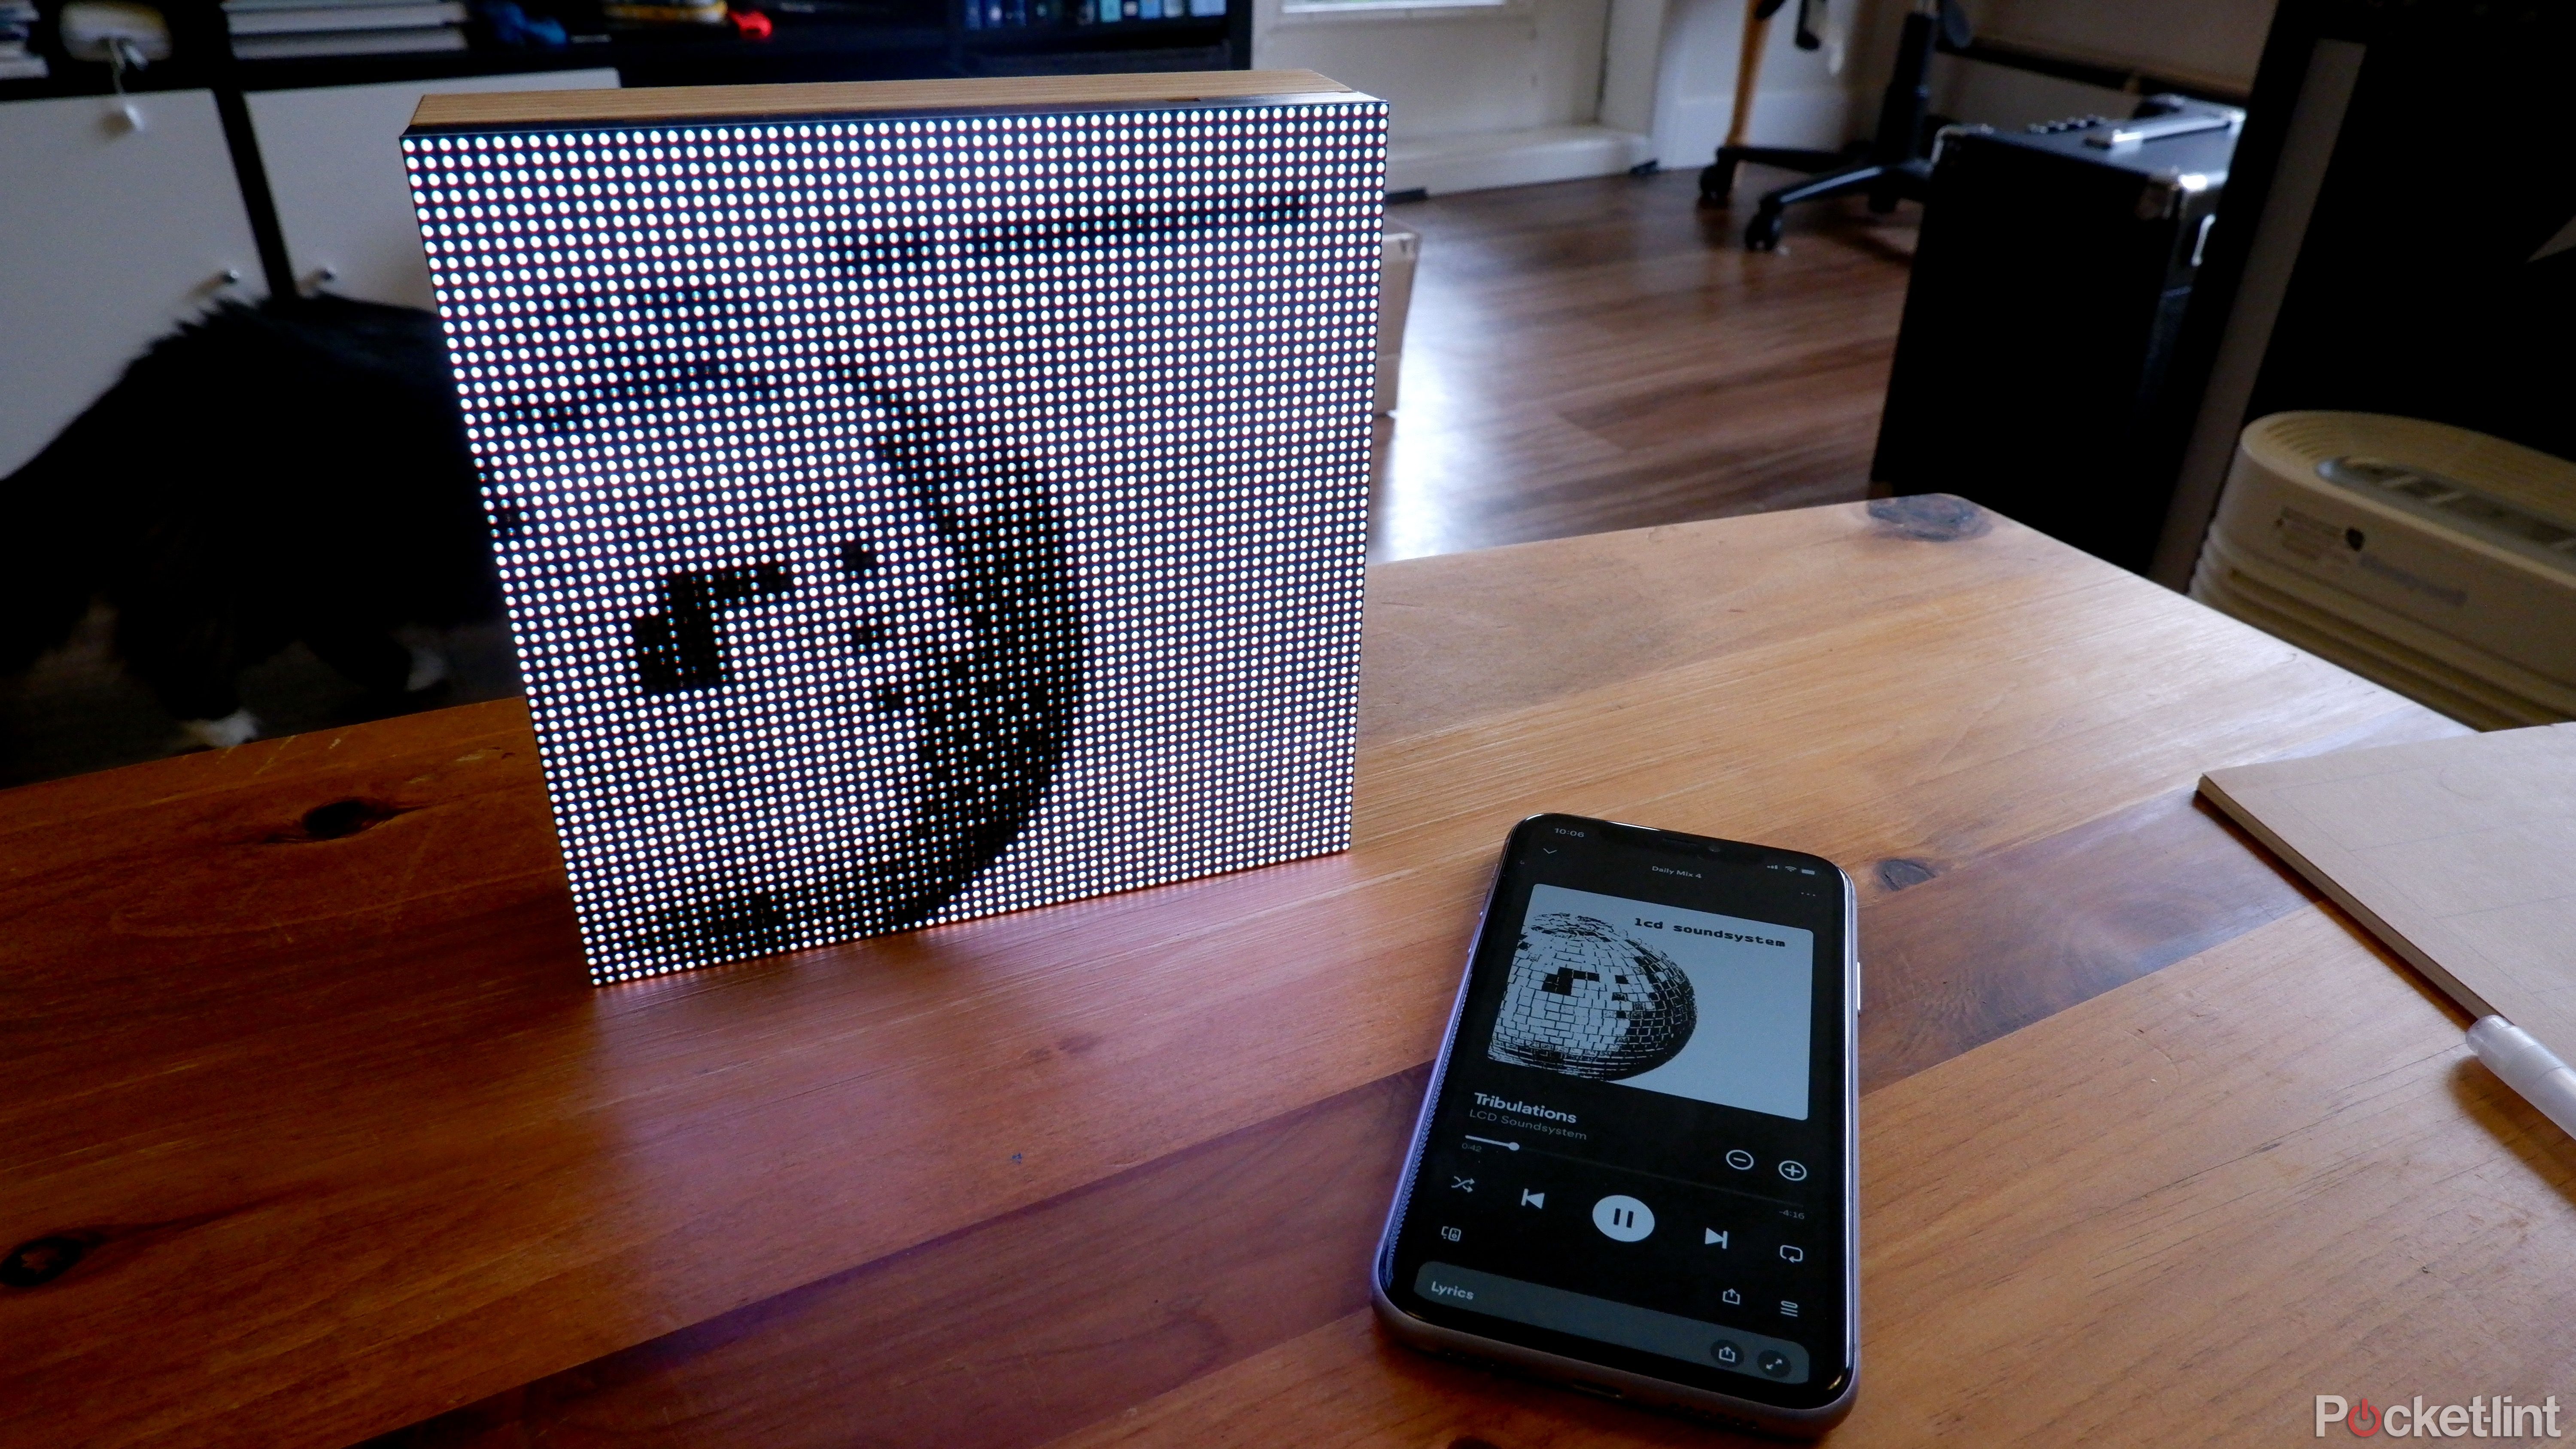 A Tuneshine on a coffee table displaying LCD soundsystem album art, next to an iPhone with Spotify open.